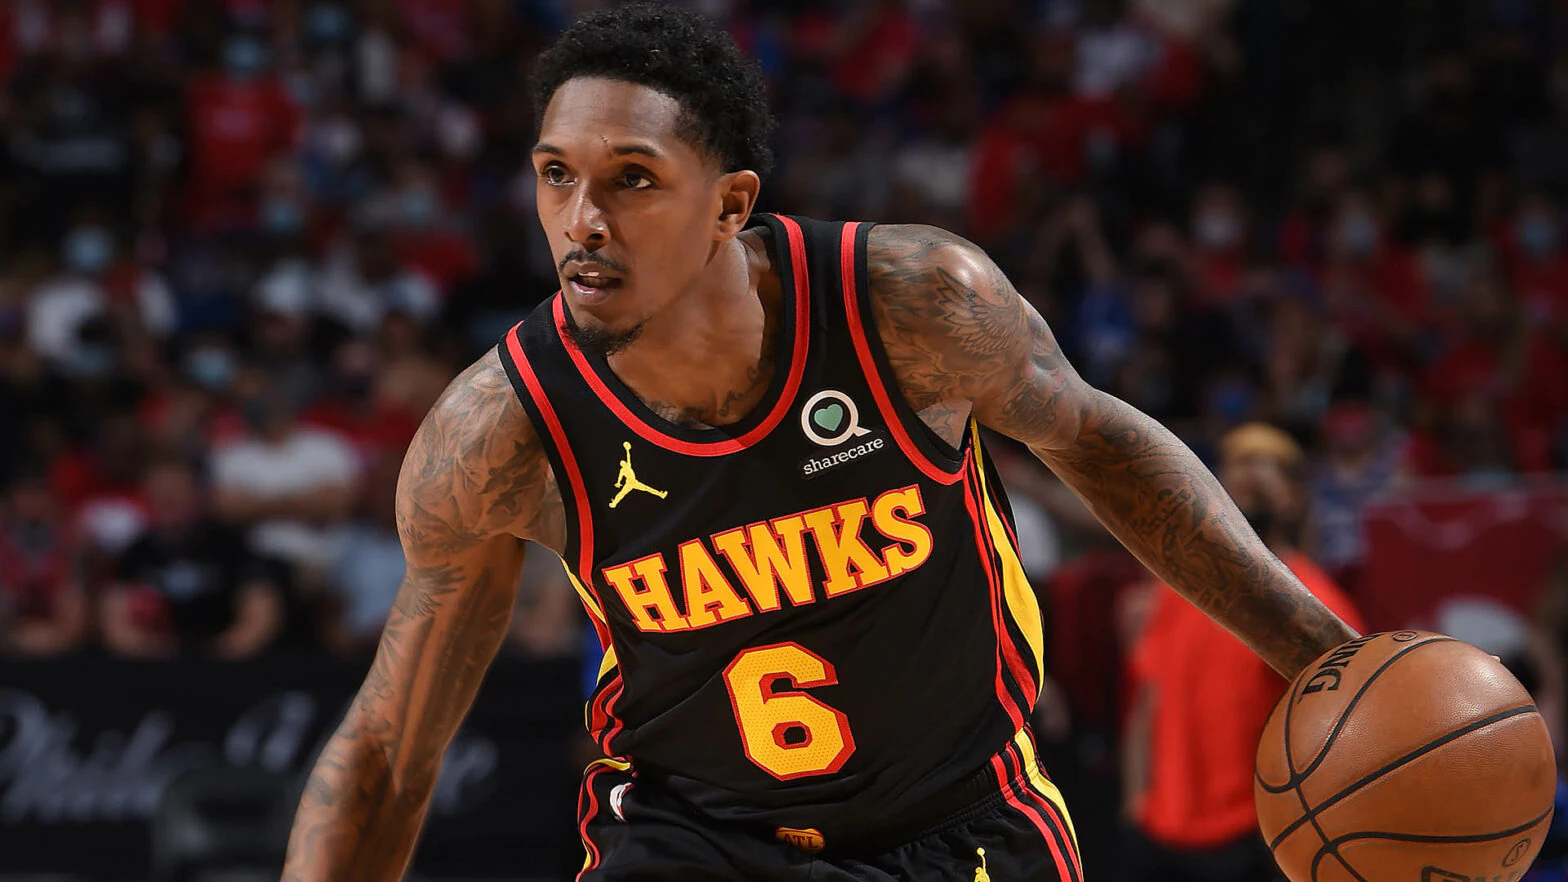 Lou Williams’ Candid Reflection on the Clippers' Culture and His Career Decline